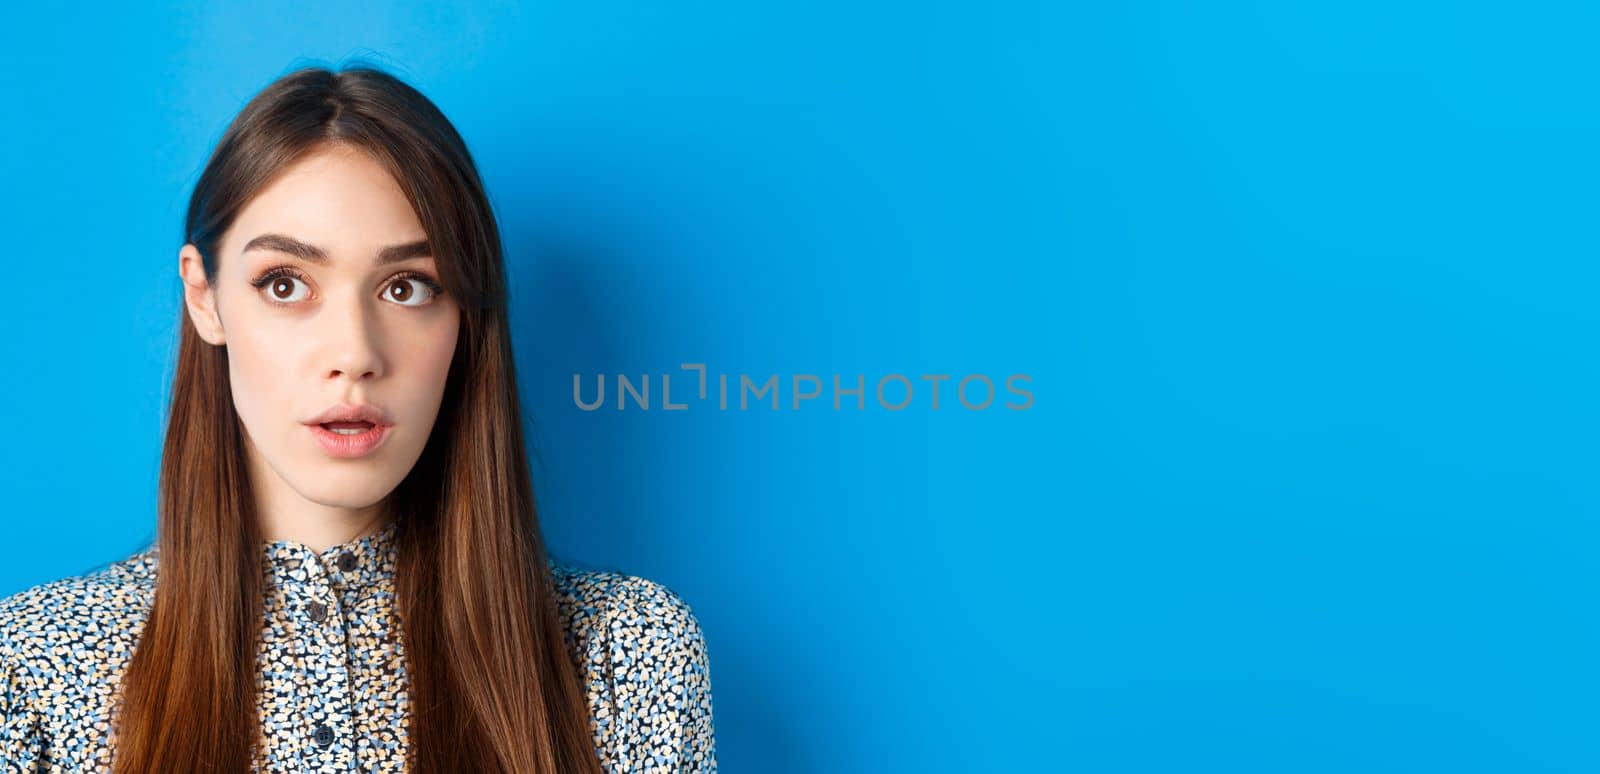 Close-up portrait of surprised young woman with natural beauty, looking at upper left corner and gasping, standing on blue background.